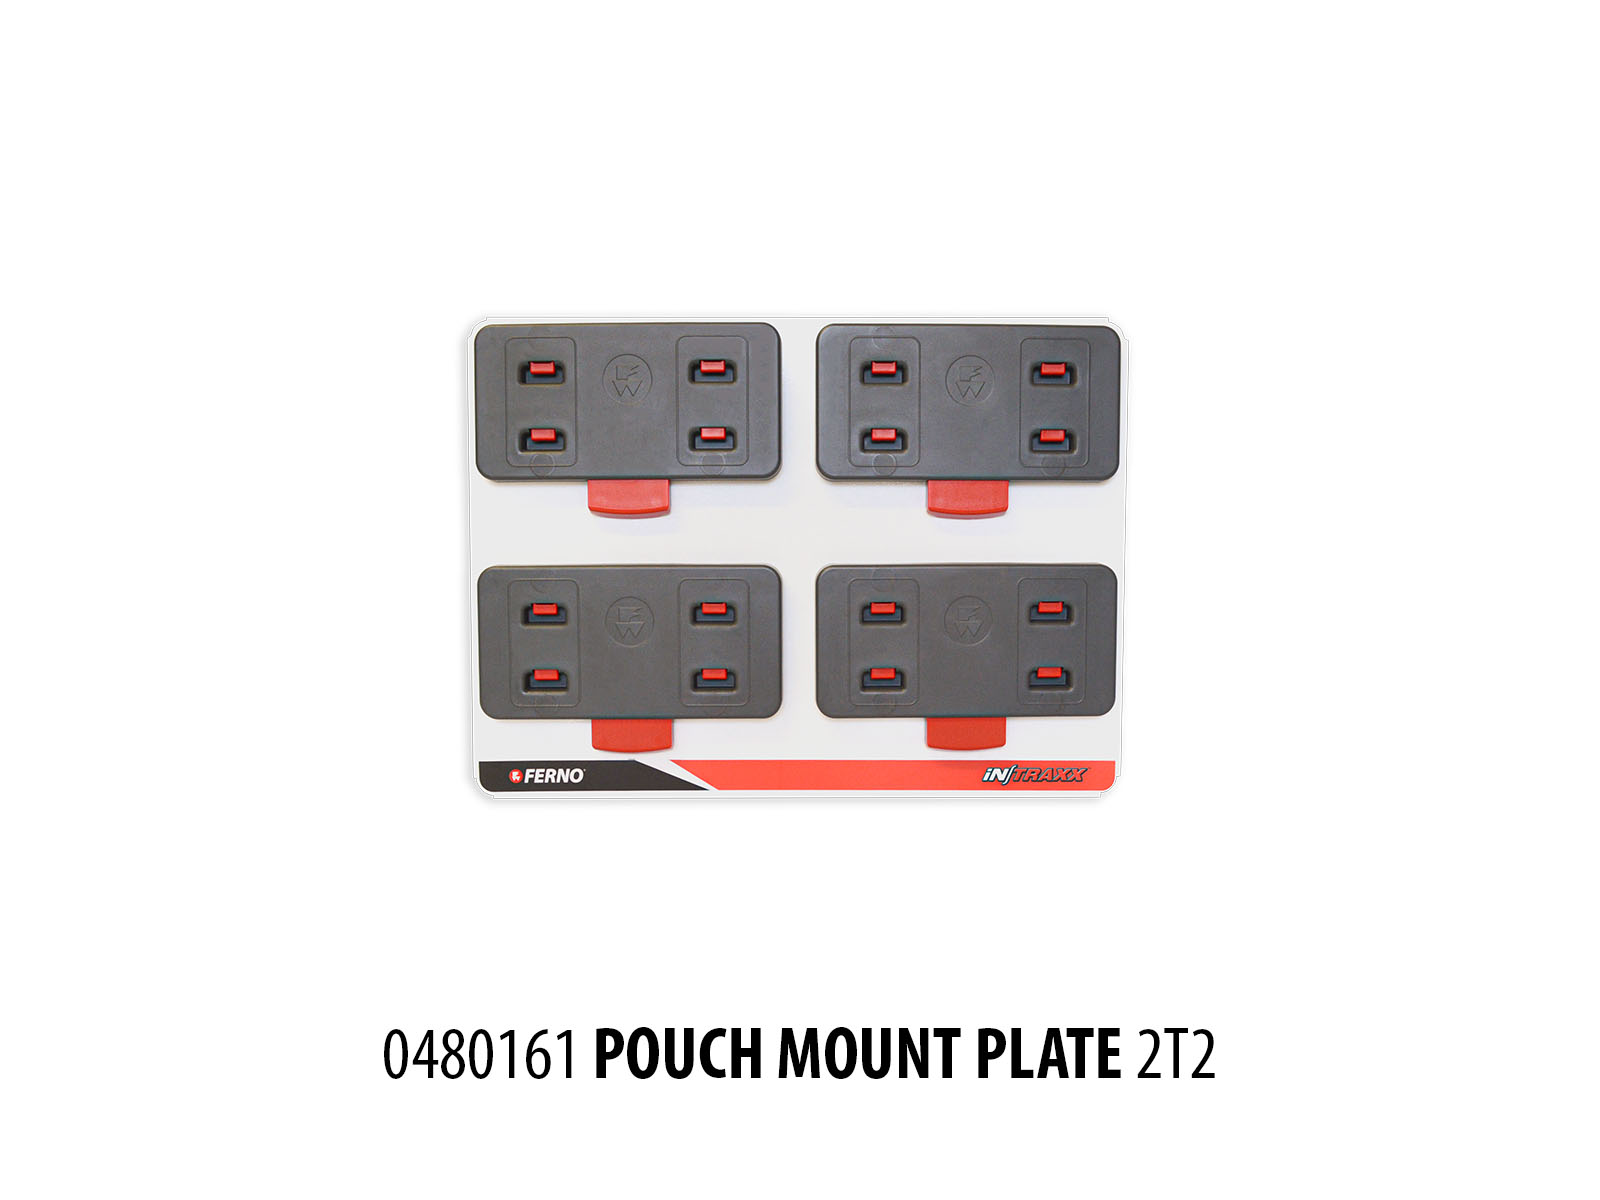 iNTRAXX Pouch Mount Plates